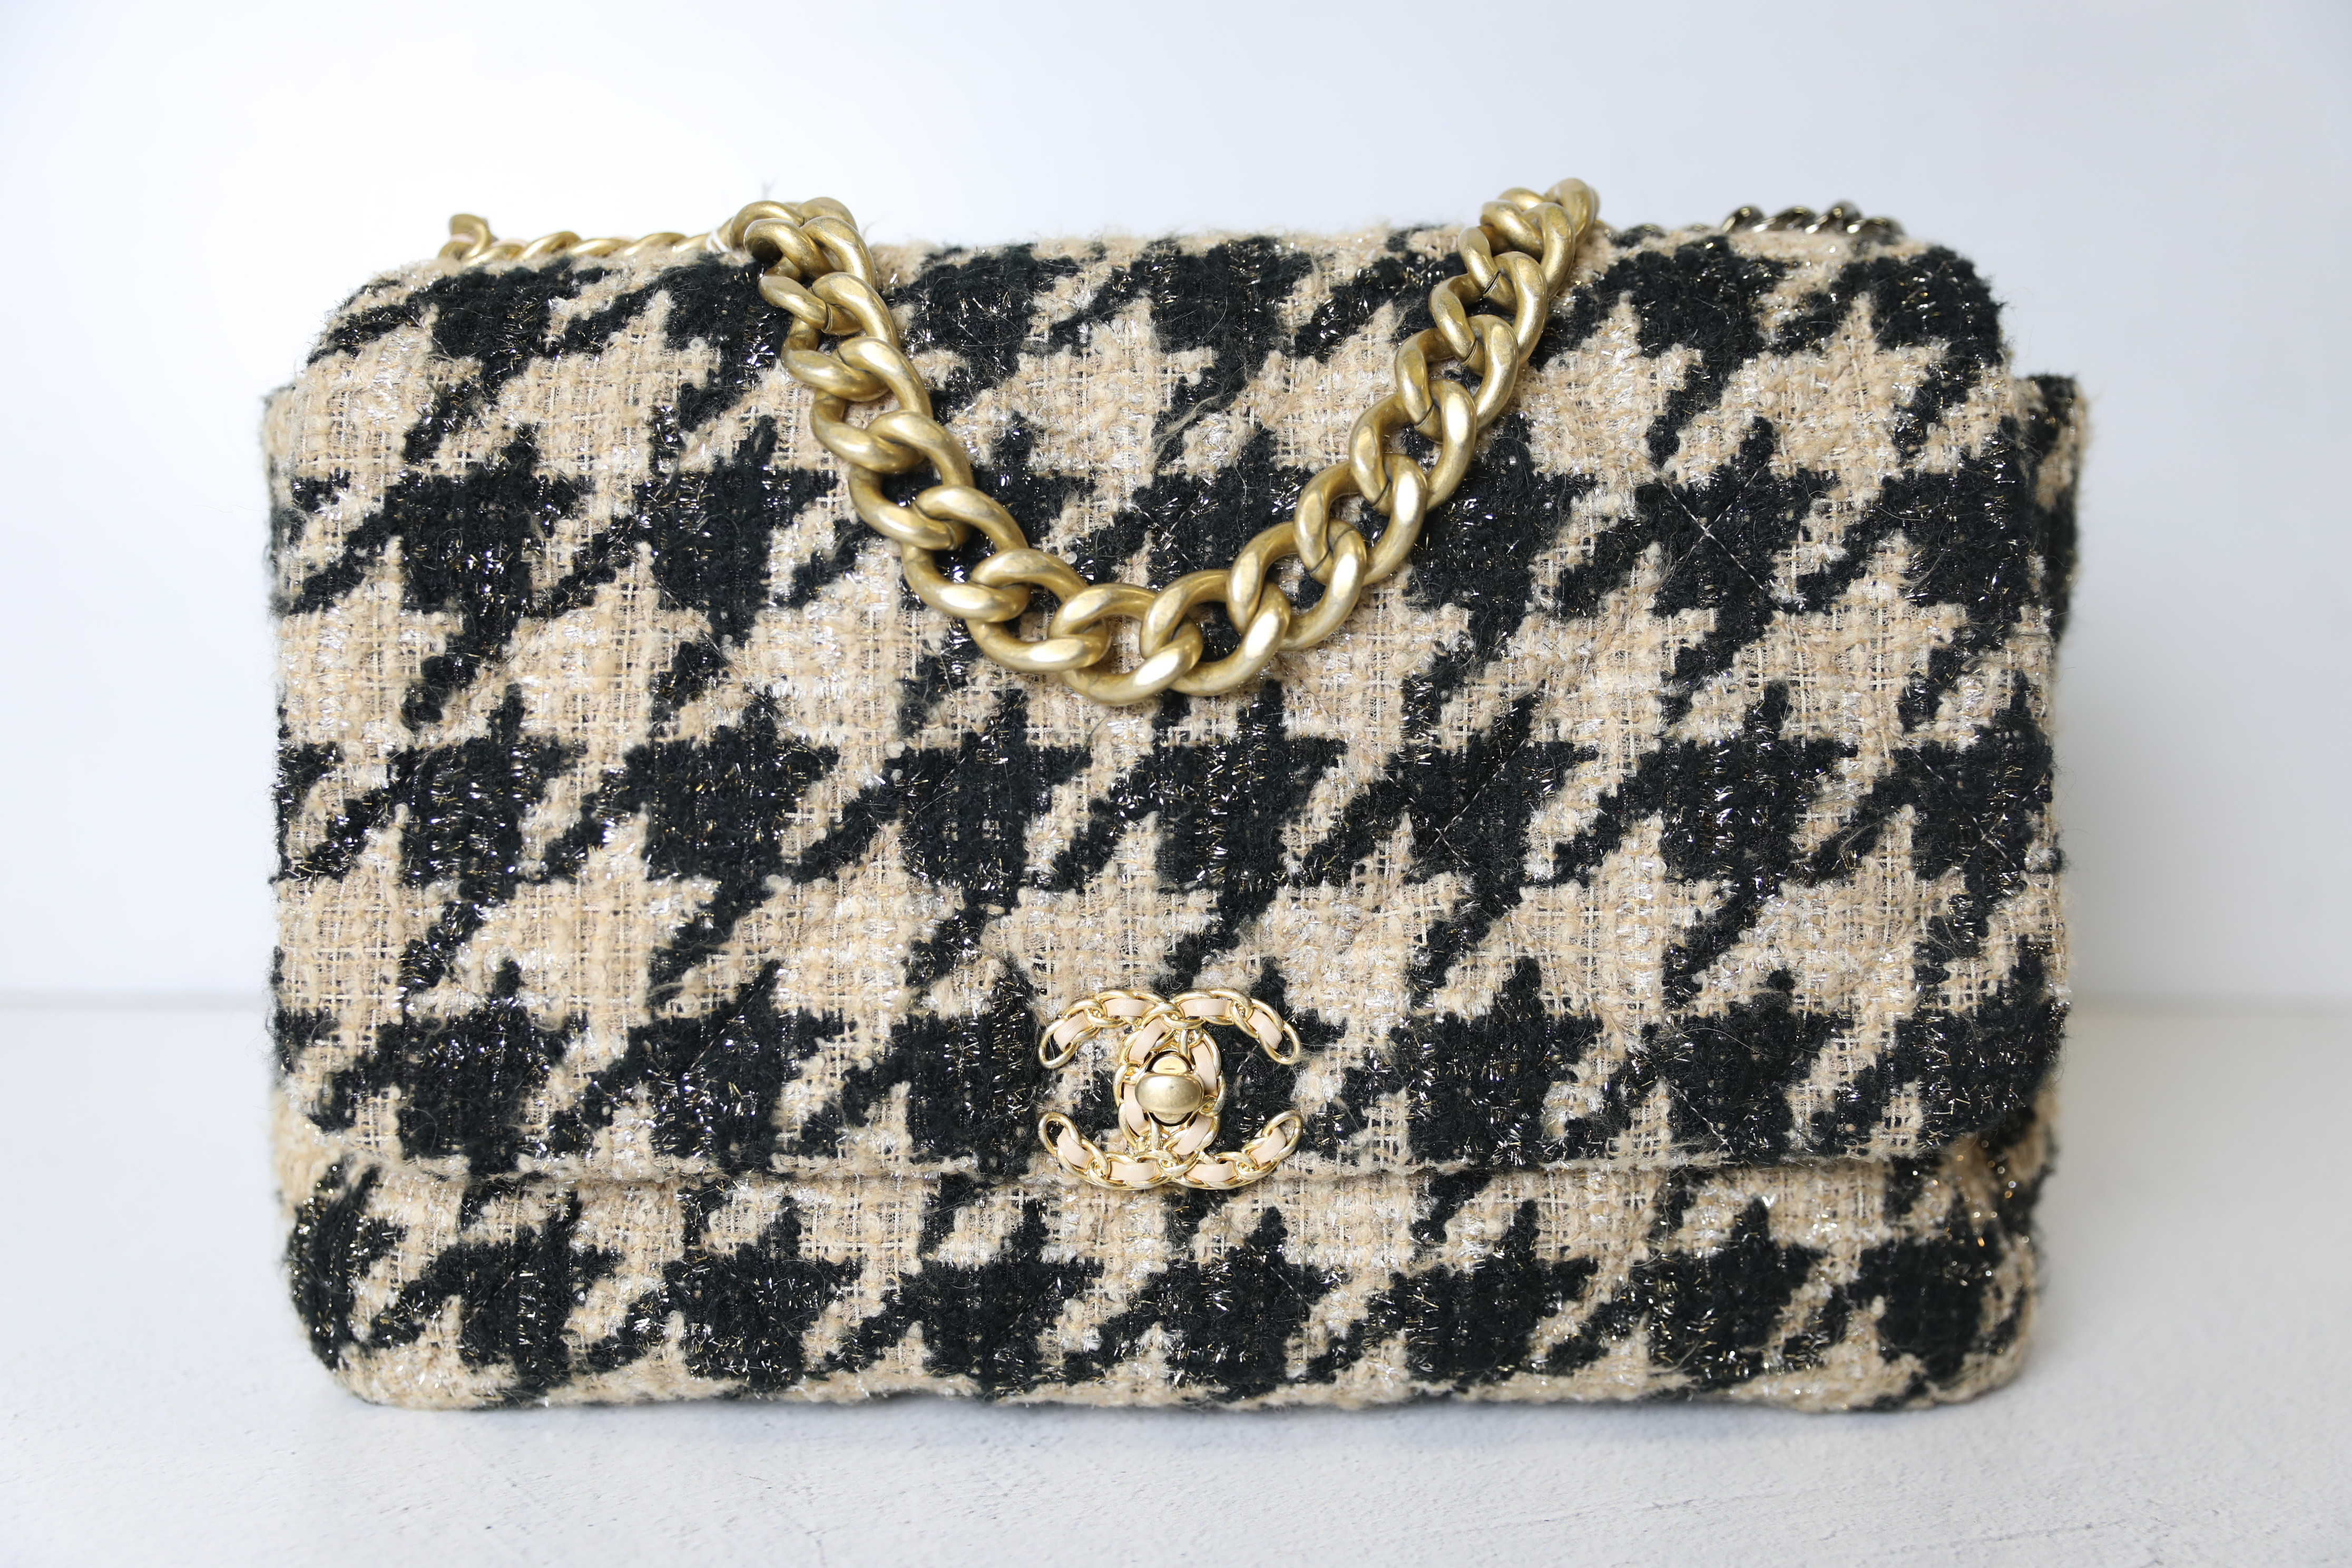 Chanel 19 Maxi, Beige and Black Houndstooth Tweed, Preowned in